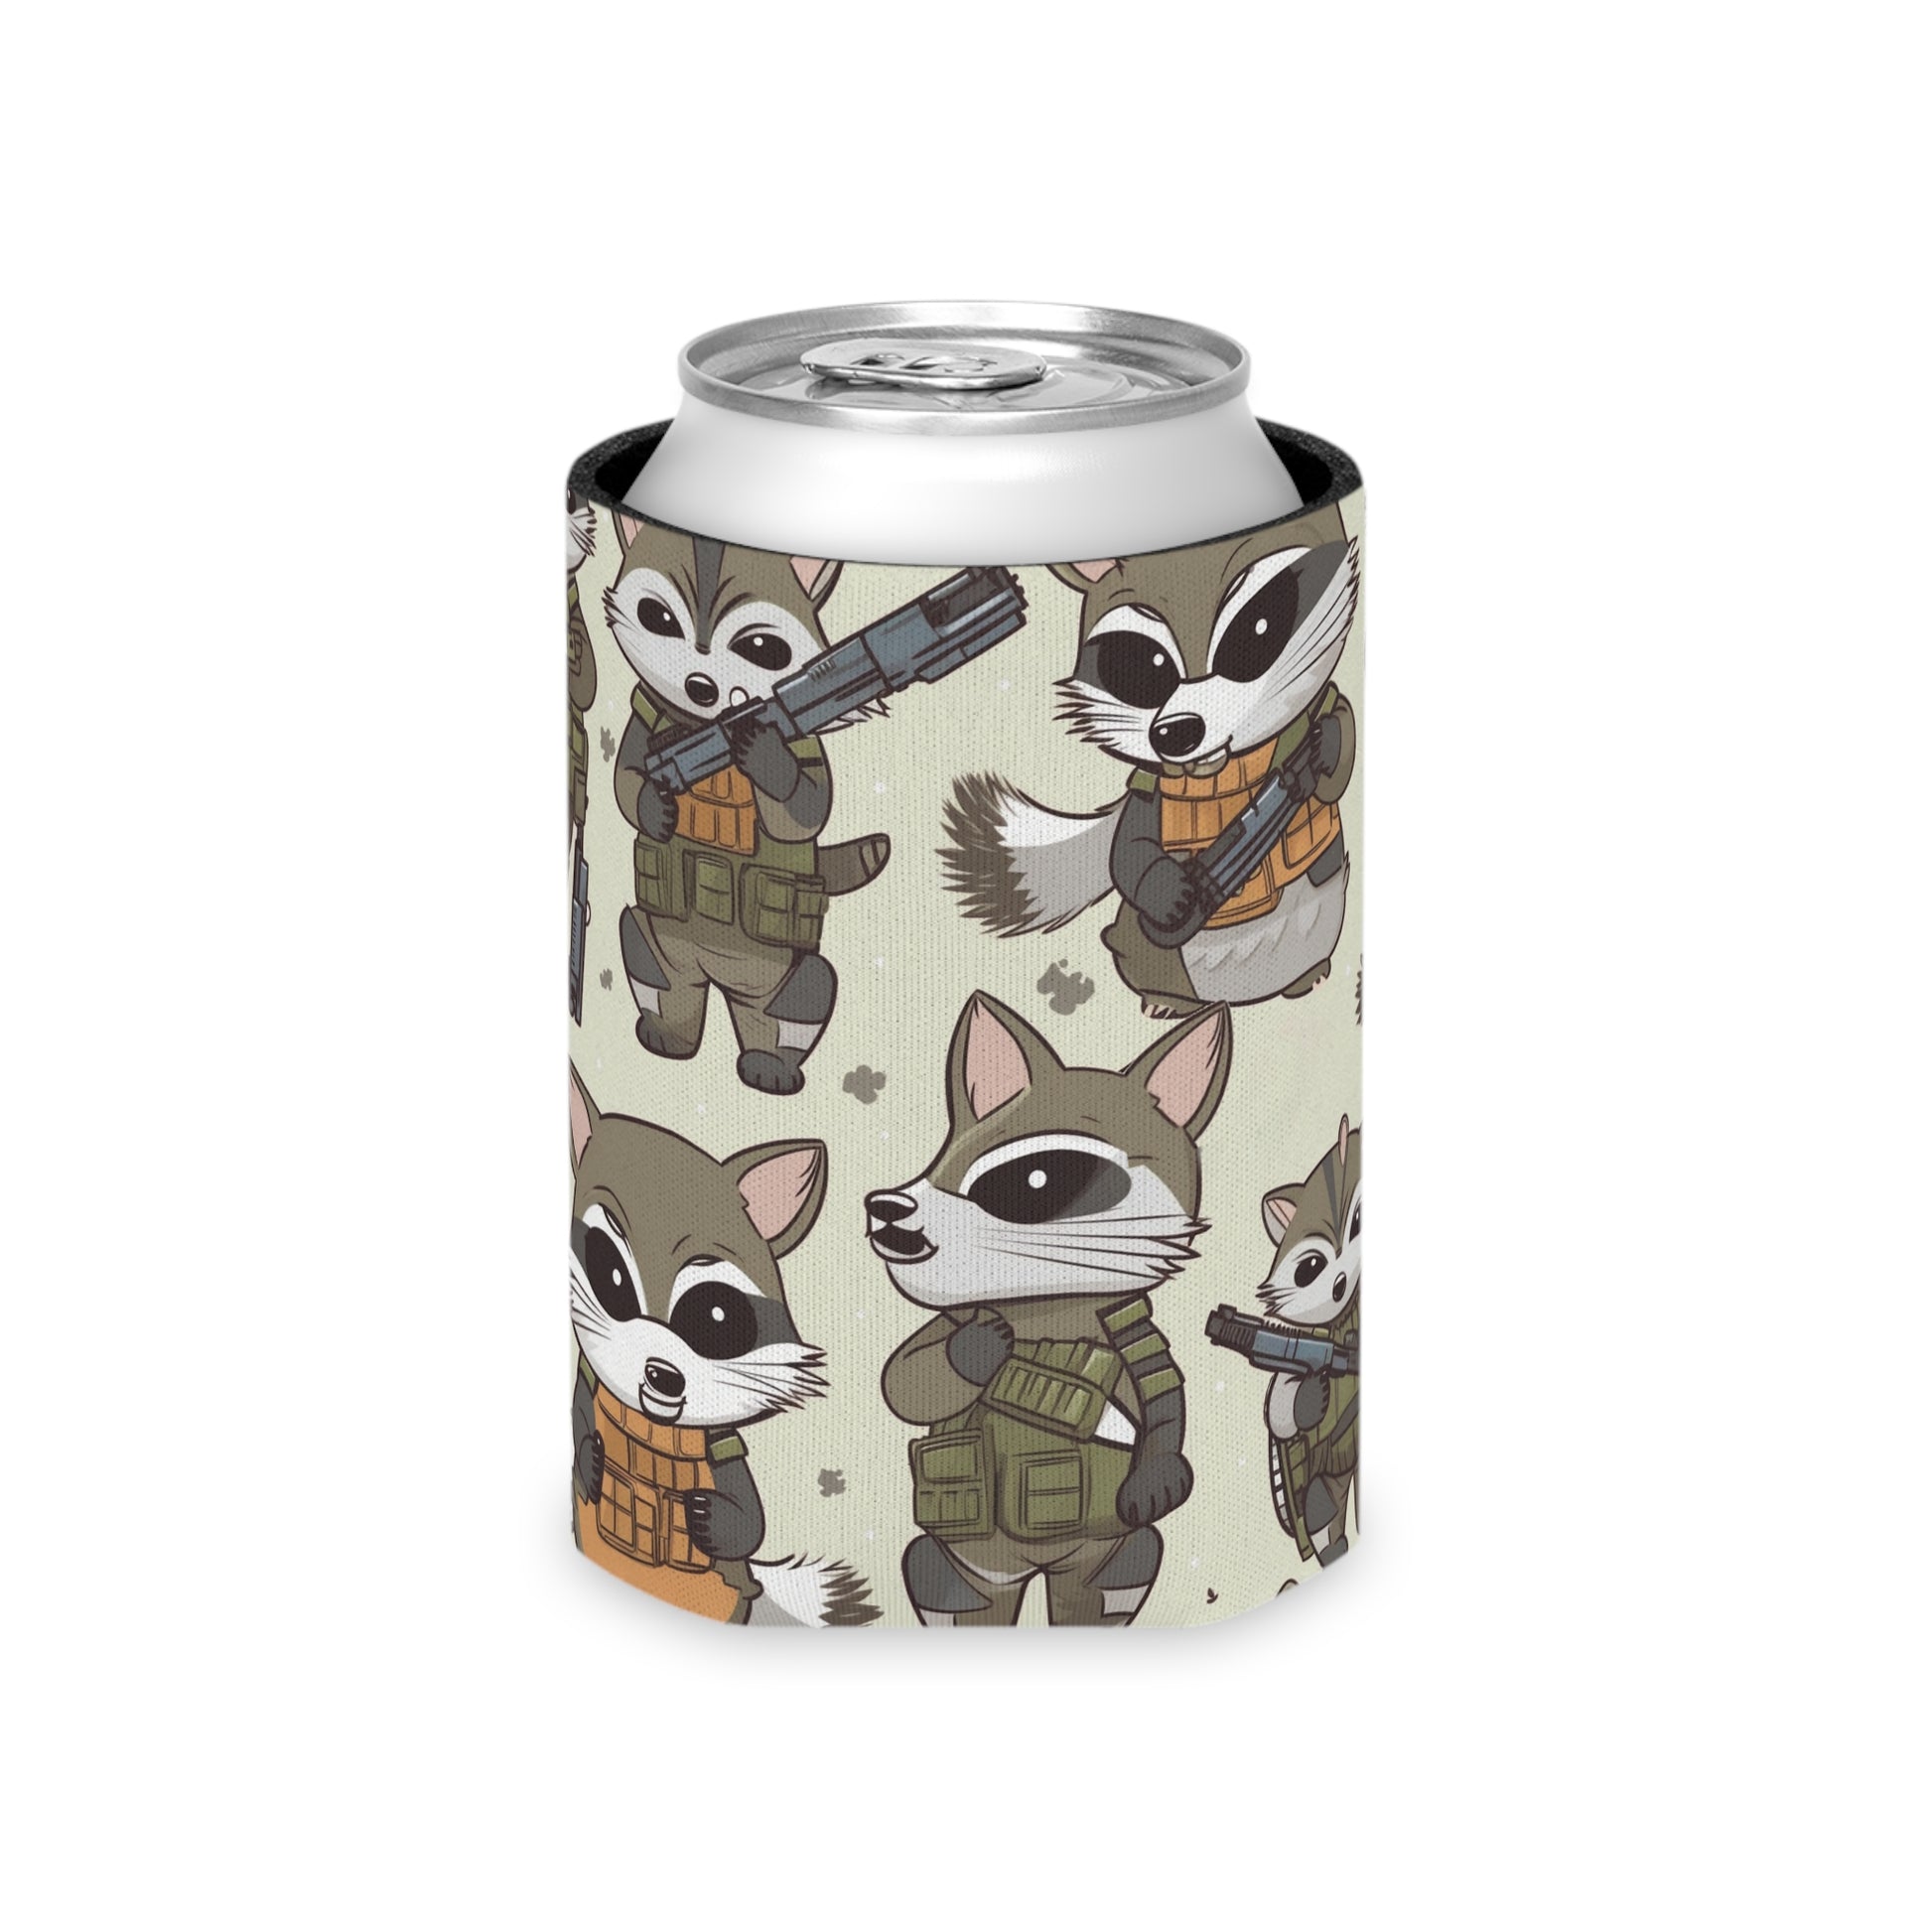 CAtuned Off-Road Forest Service Can Cooler Koozie